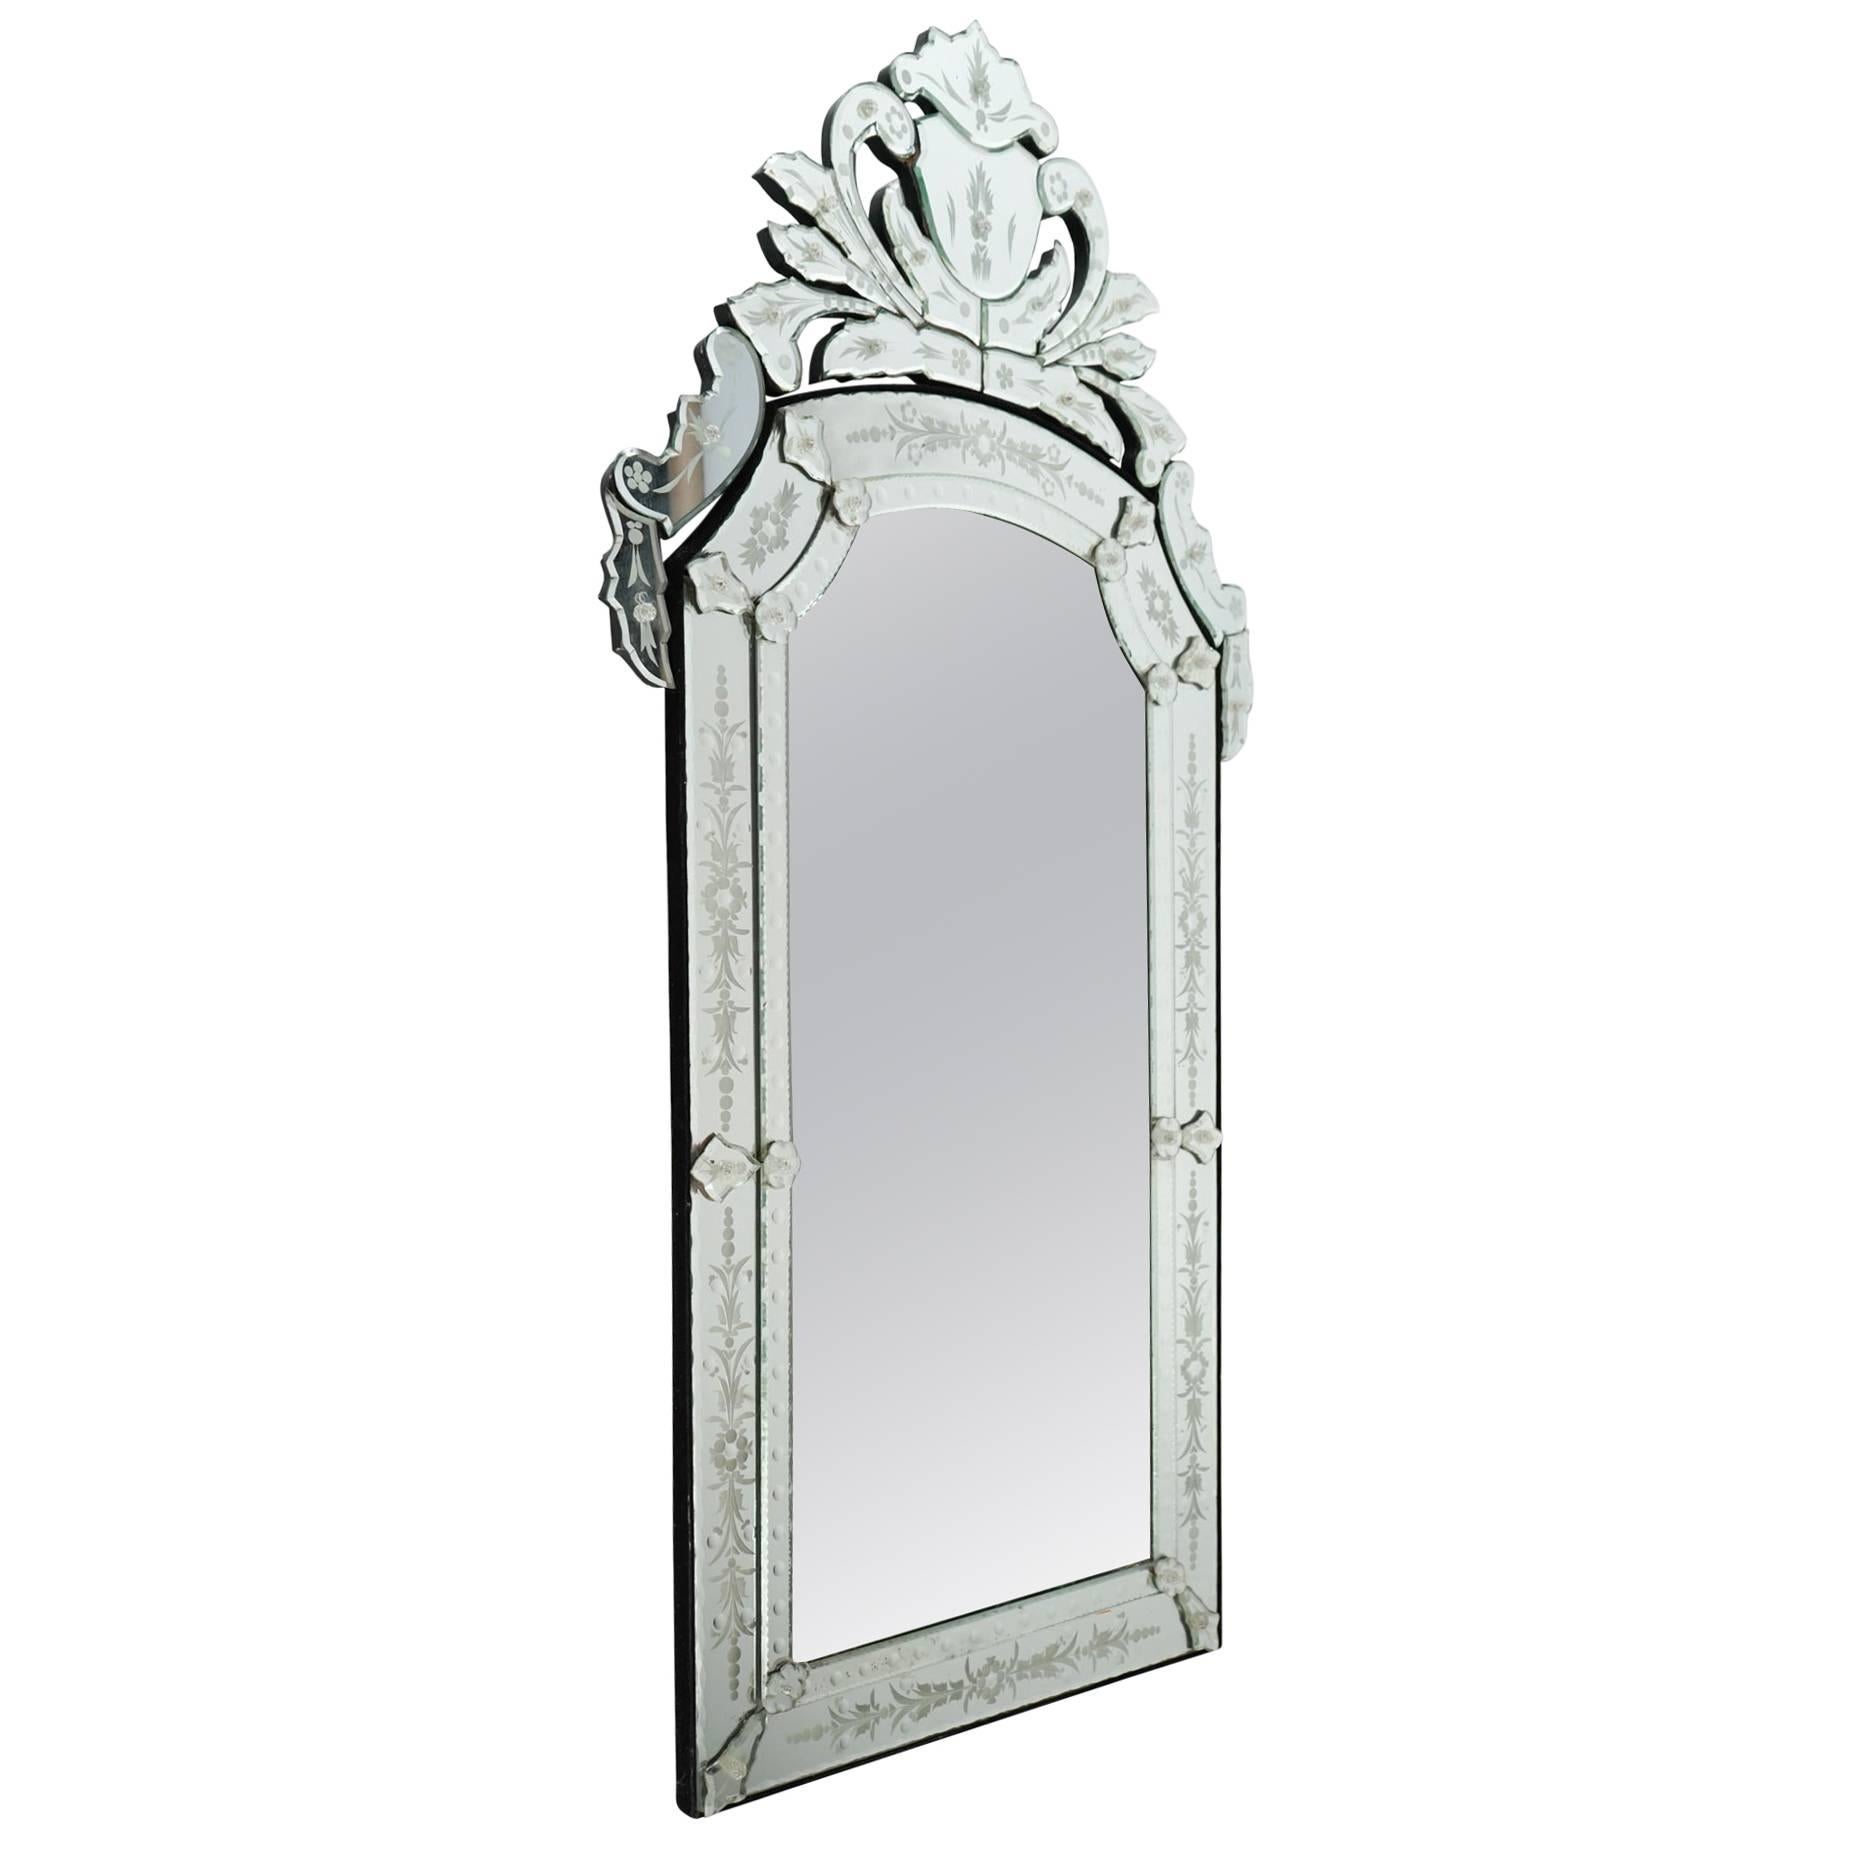 Pair of Venetian Mirror of the 20th Century, Glass is Etched and Bevelled